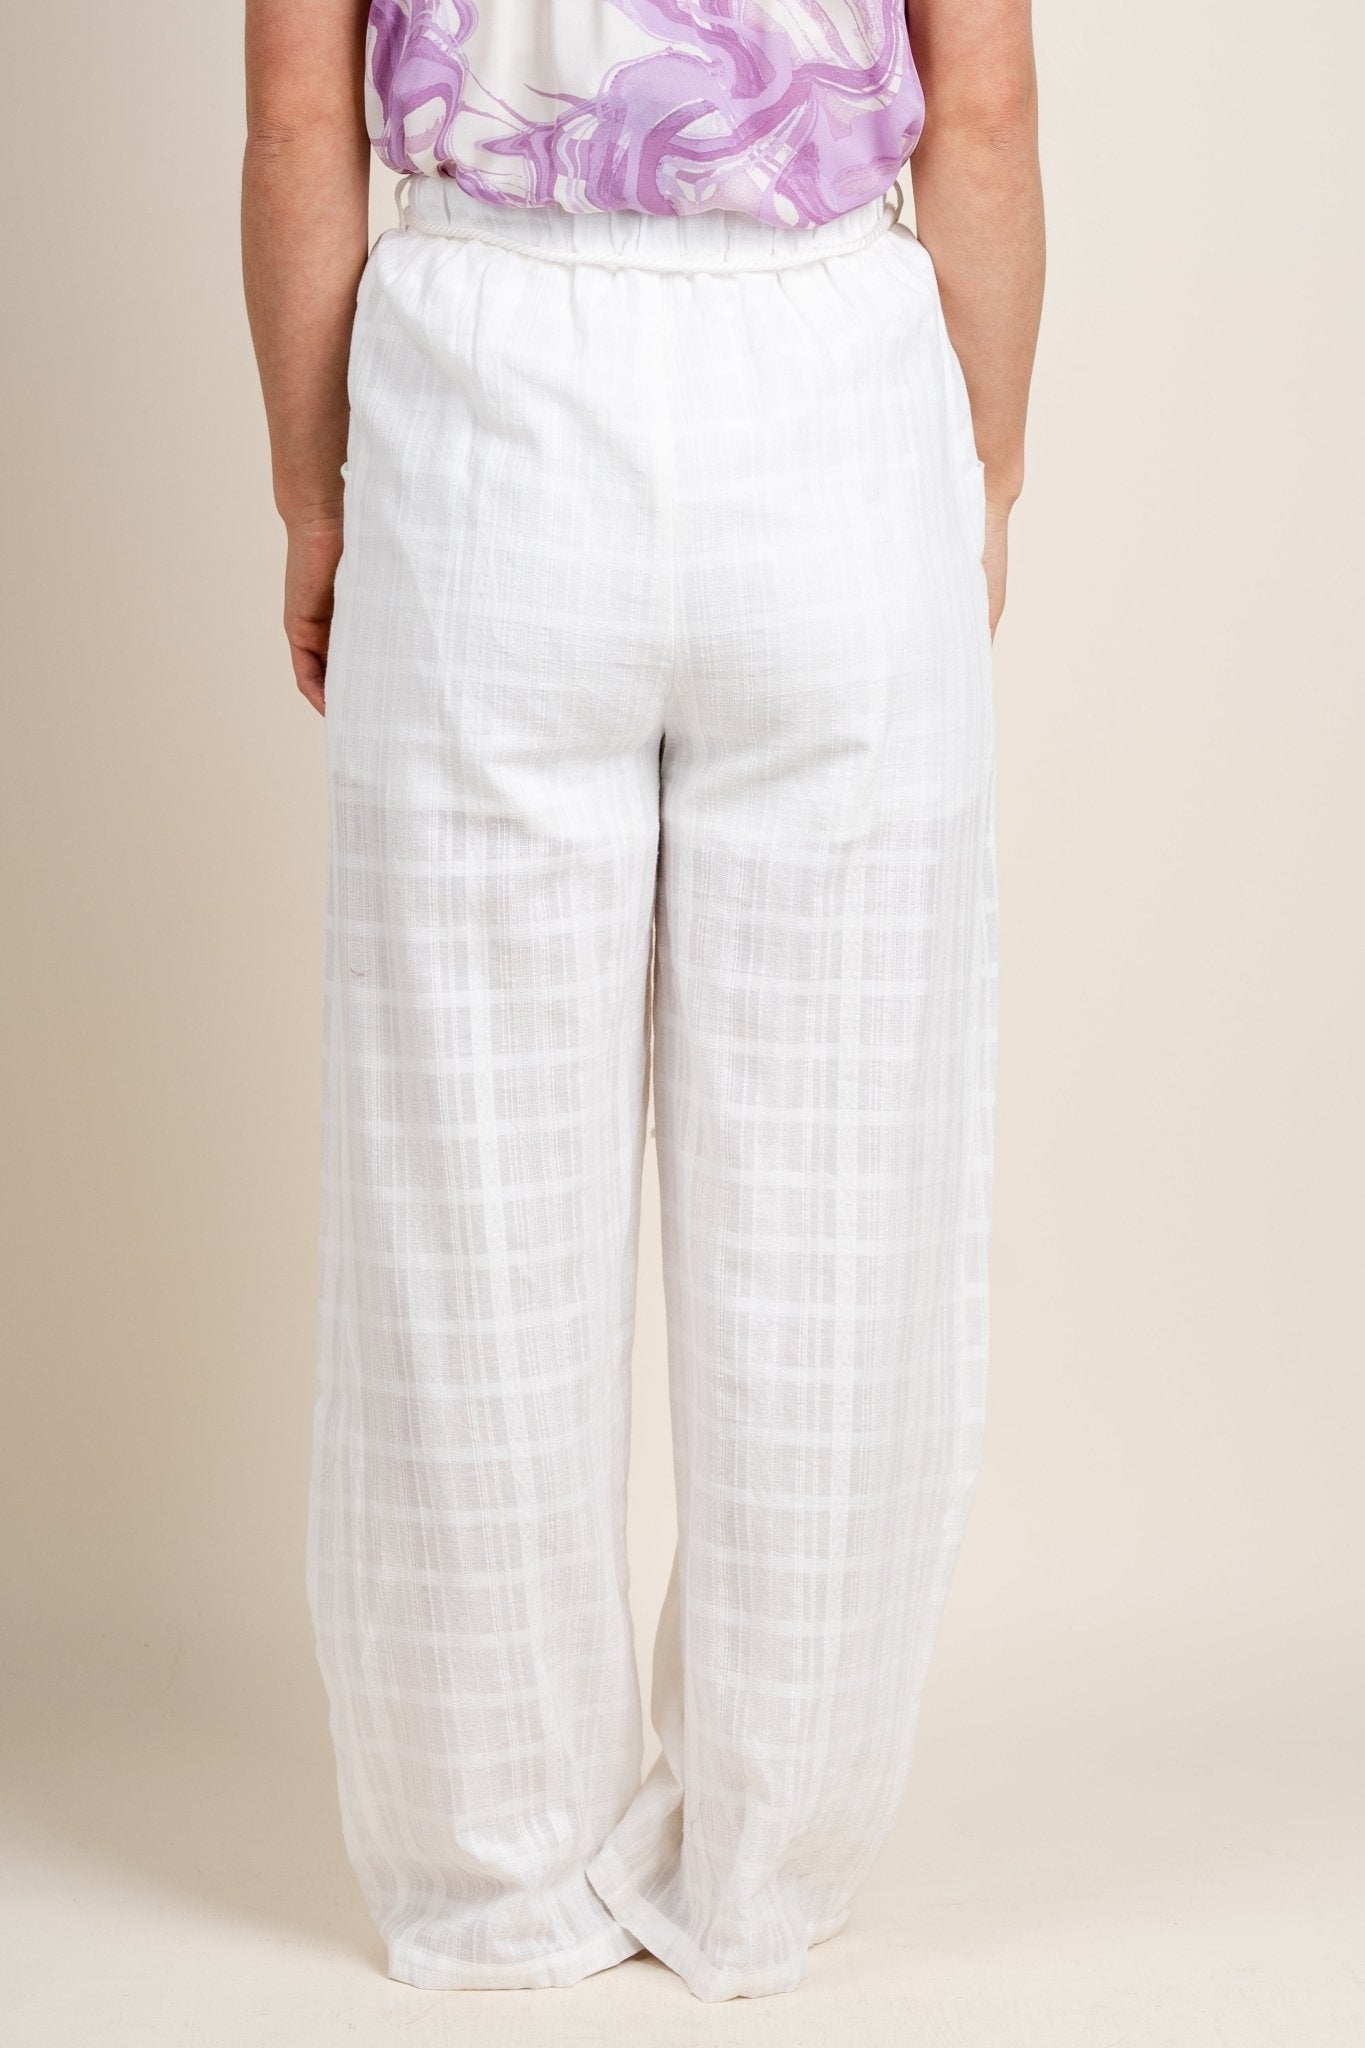 Linen tie waist pants off white - Adorable Pants - Stylish Vacation T-Shirts at Lush Fashion Lounge Boutique in Oklahoma City